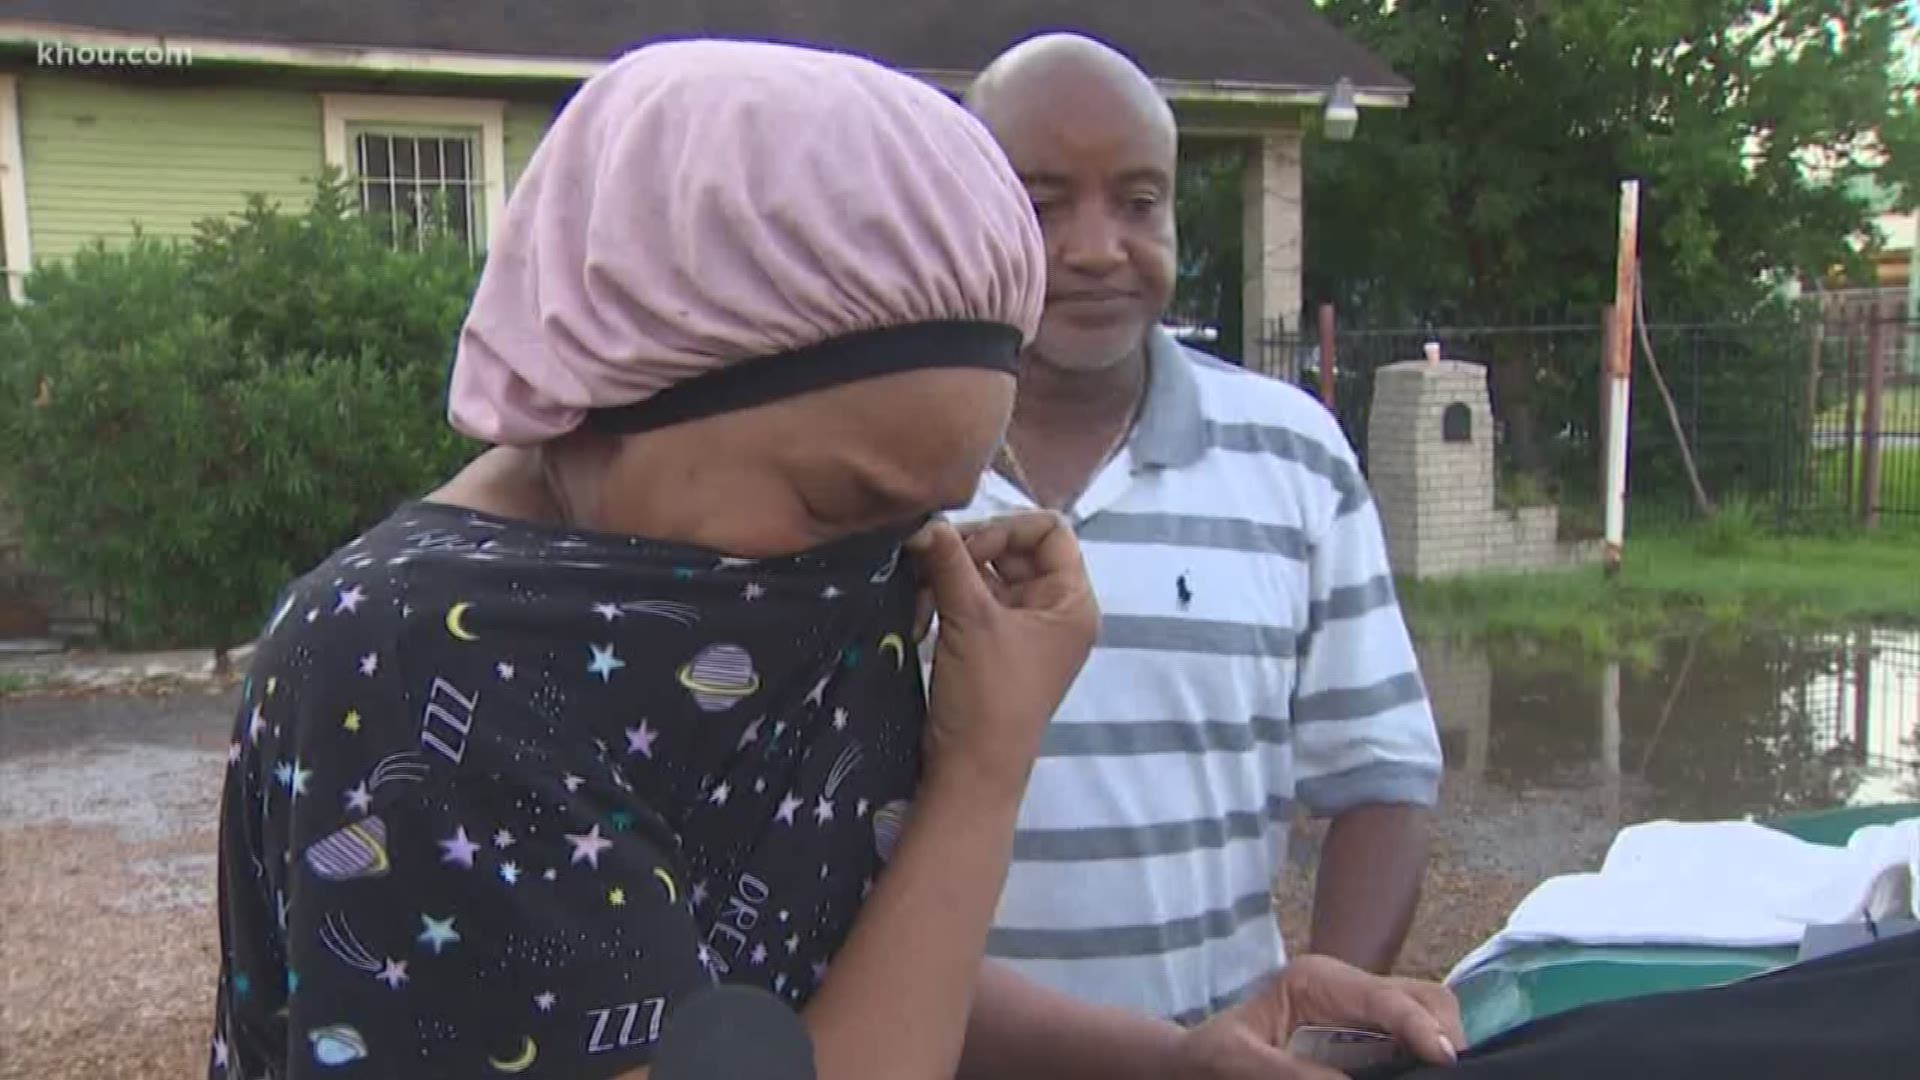 A family, whose home was destroyed by a fire just days before their two young daughters’ first day of school, has received an outpouring of support from the community.